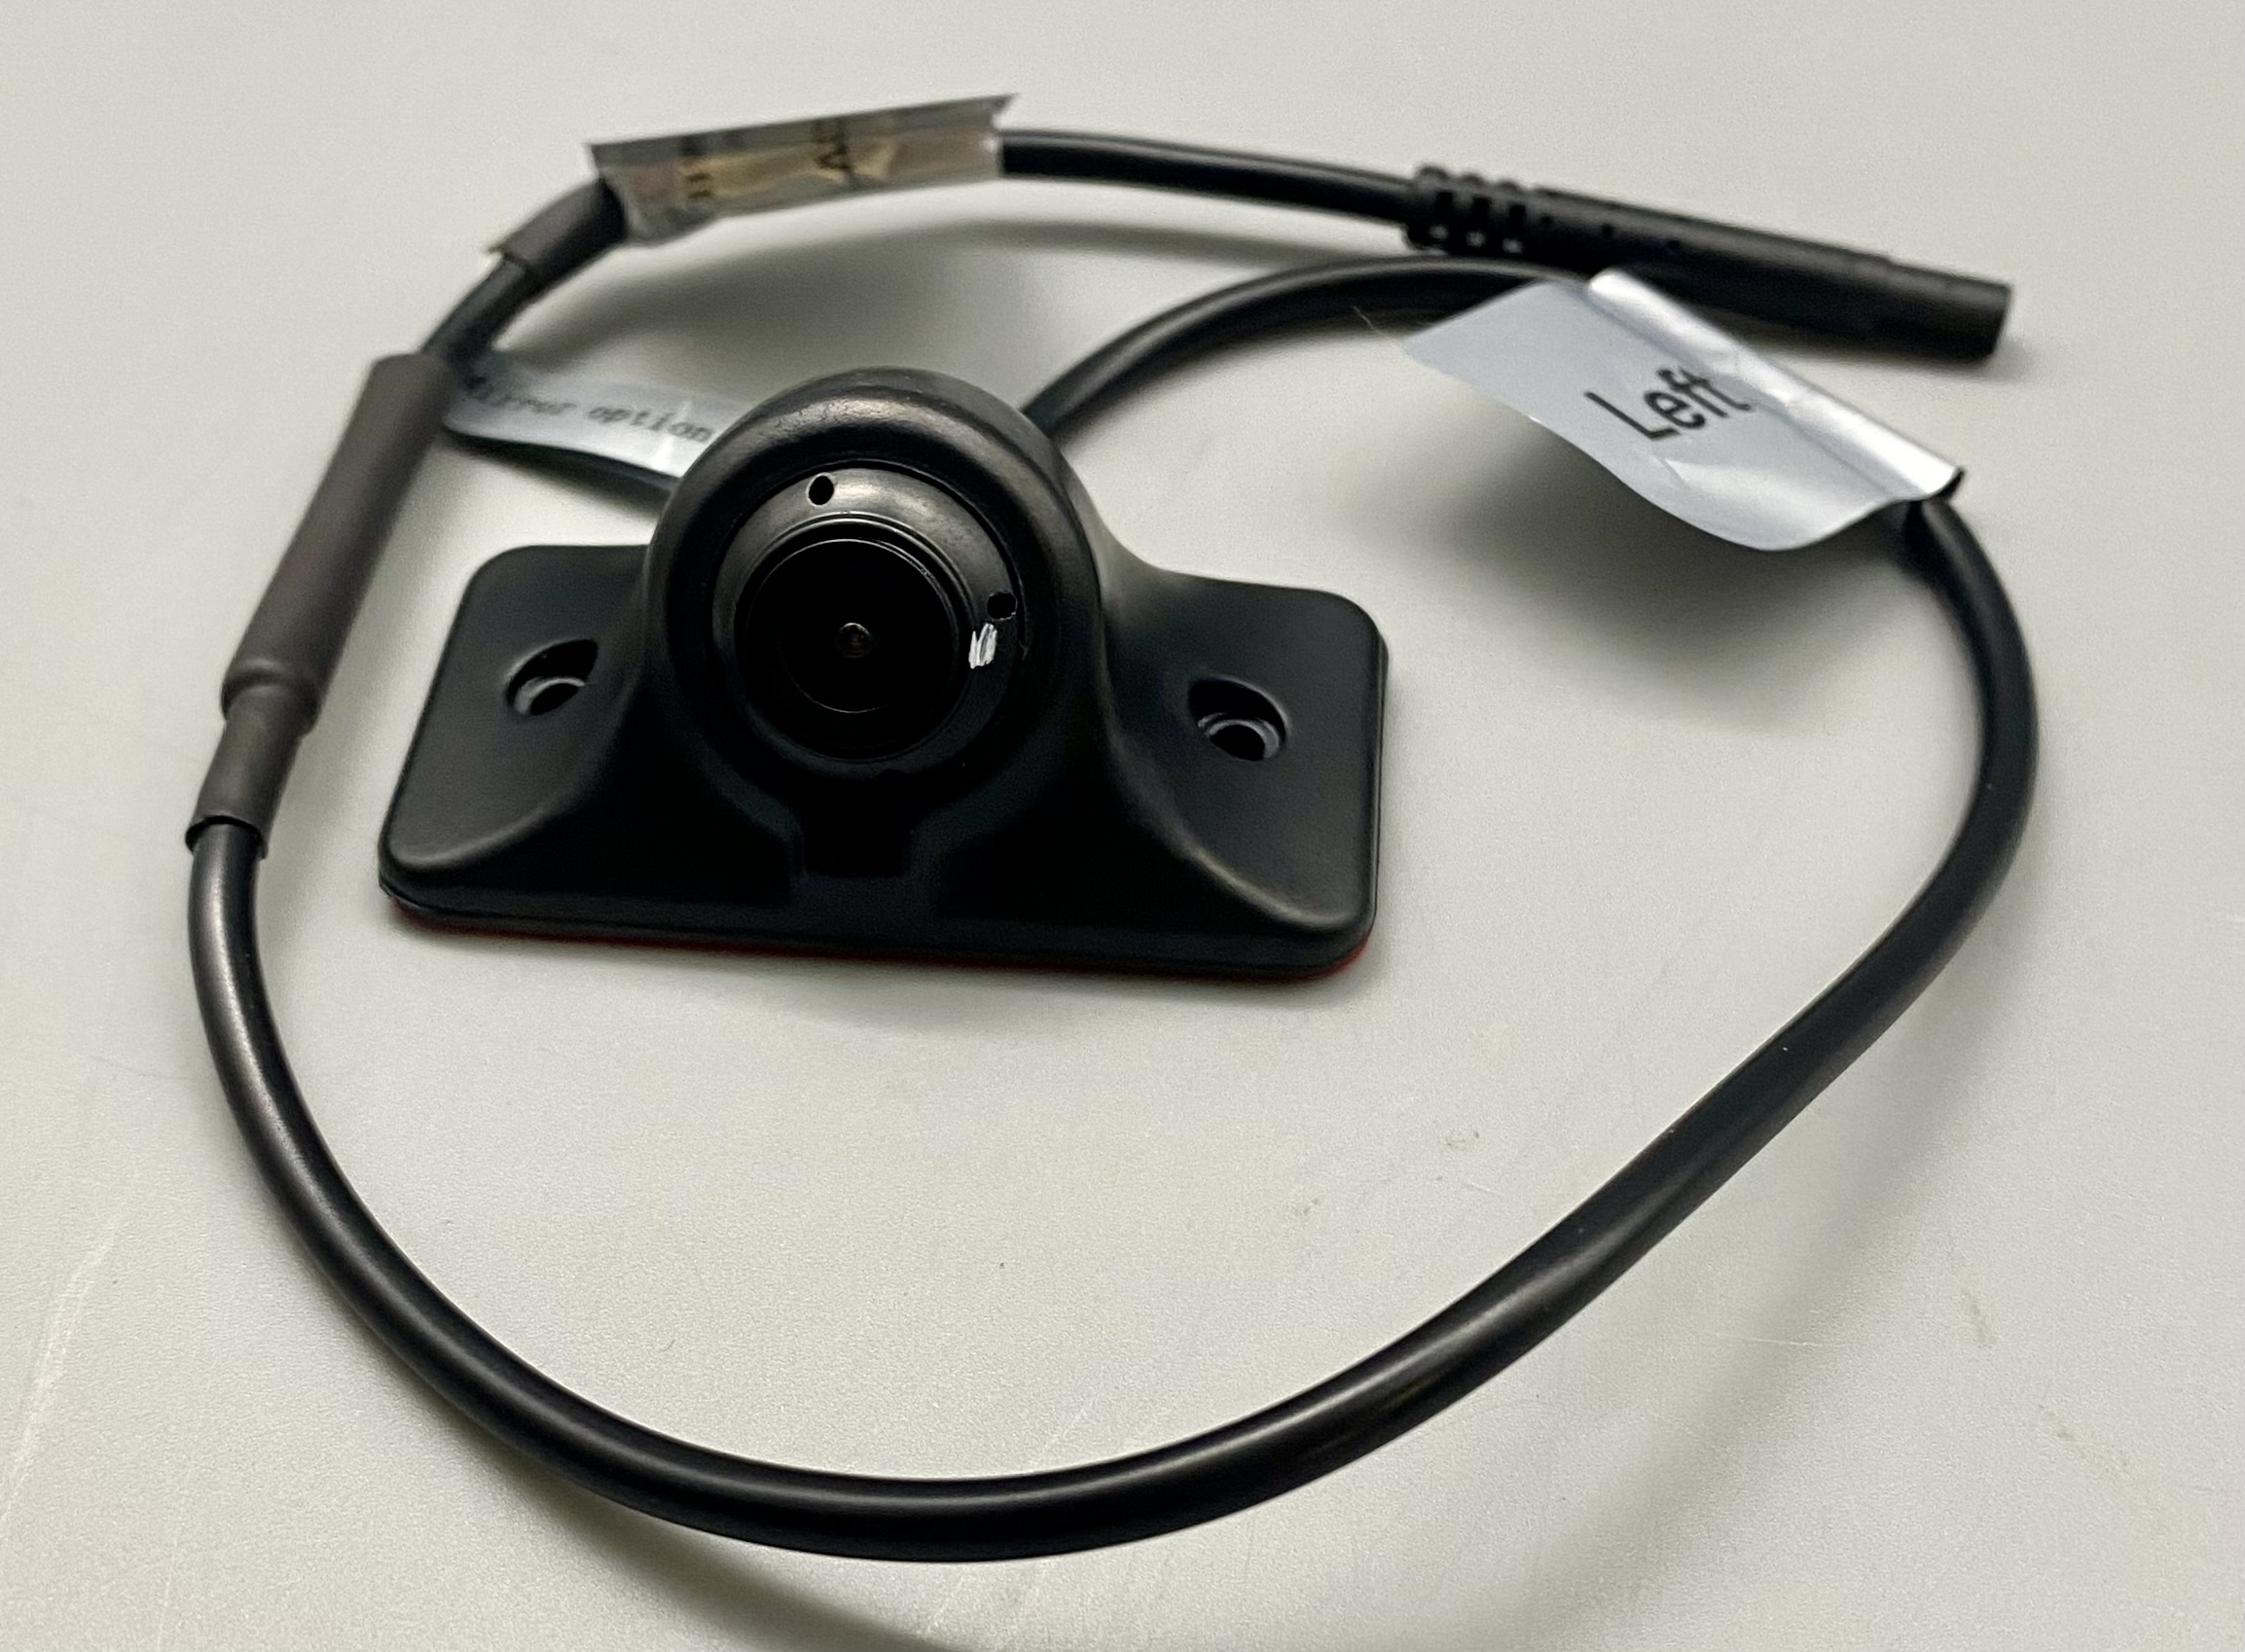 Compact Left Side Camera for RV. Uses Cable# "RVHARPCAM-4P15"